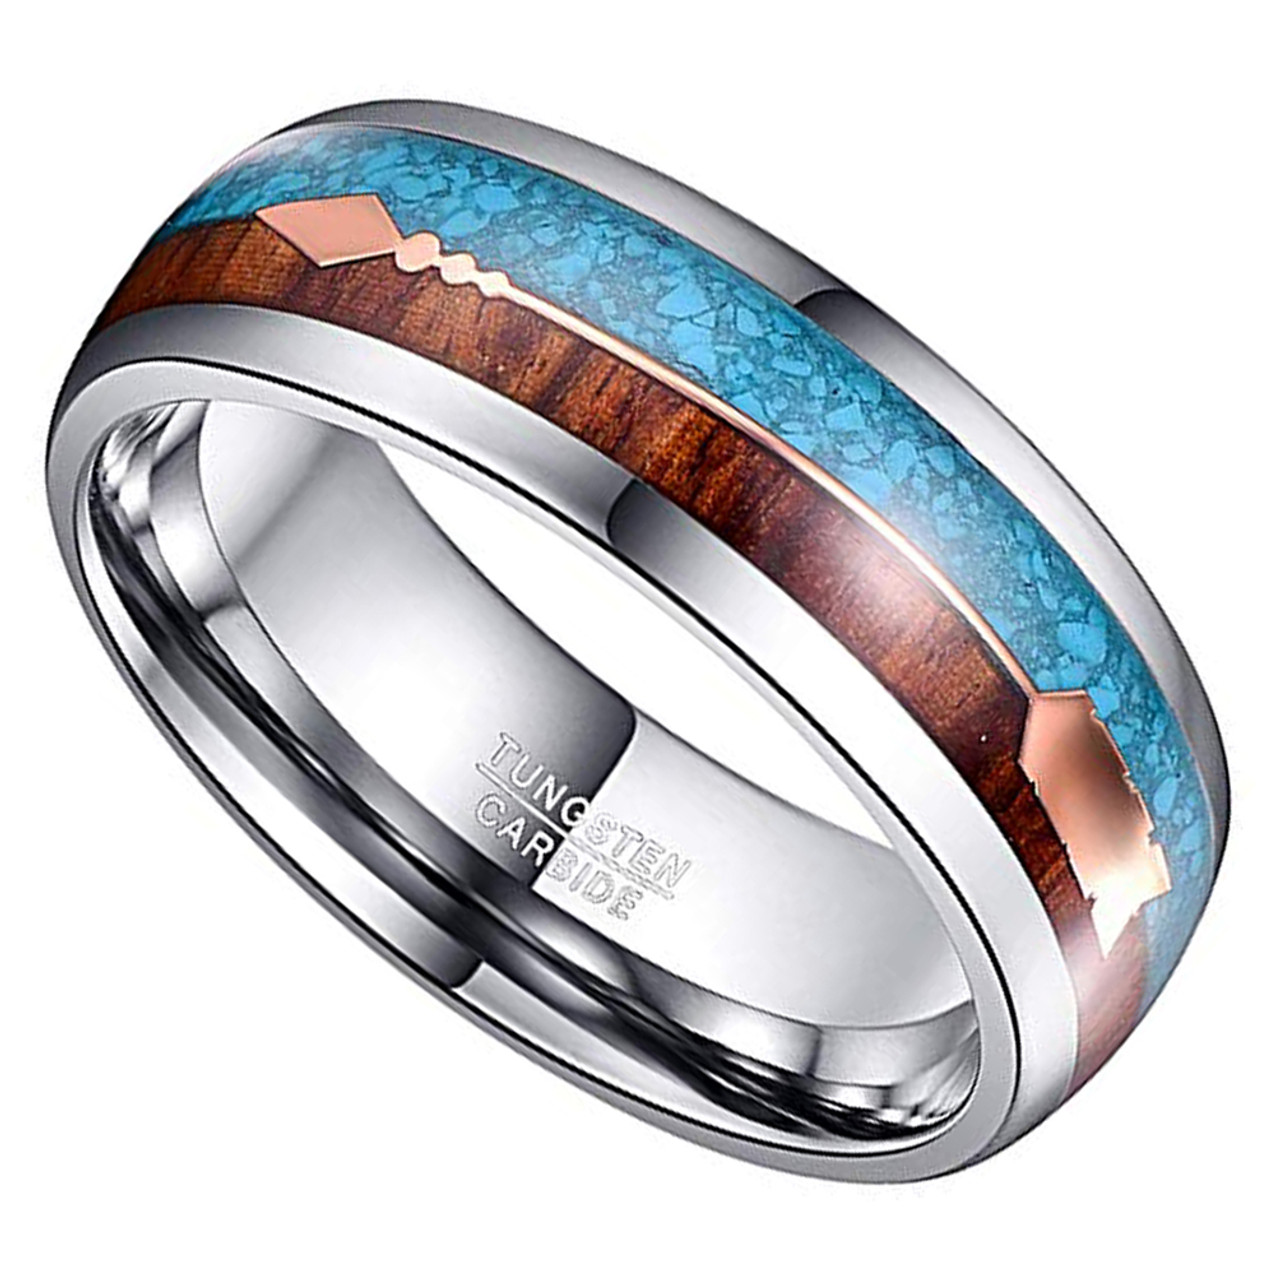 (8mm) Unisex or Men's Tungsten Carbide Wedding ring bands. Silver Tone Band with Cupid's Arrow over Wood and Blue Turquoise Inlay. Tungsten Carbide Domed Top Ring.